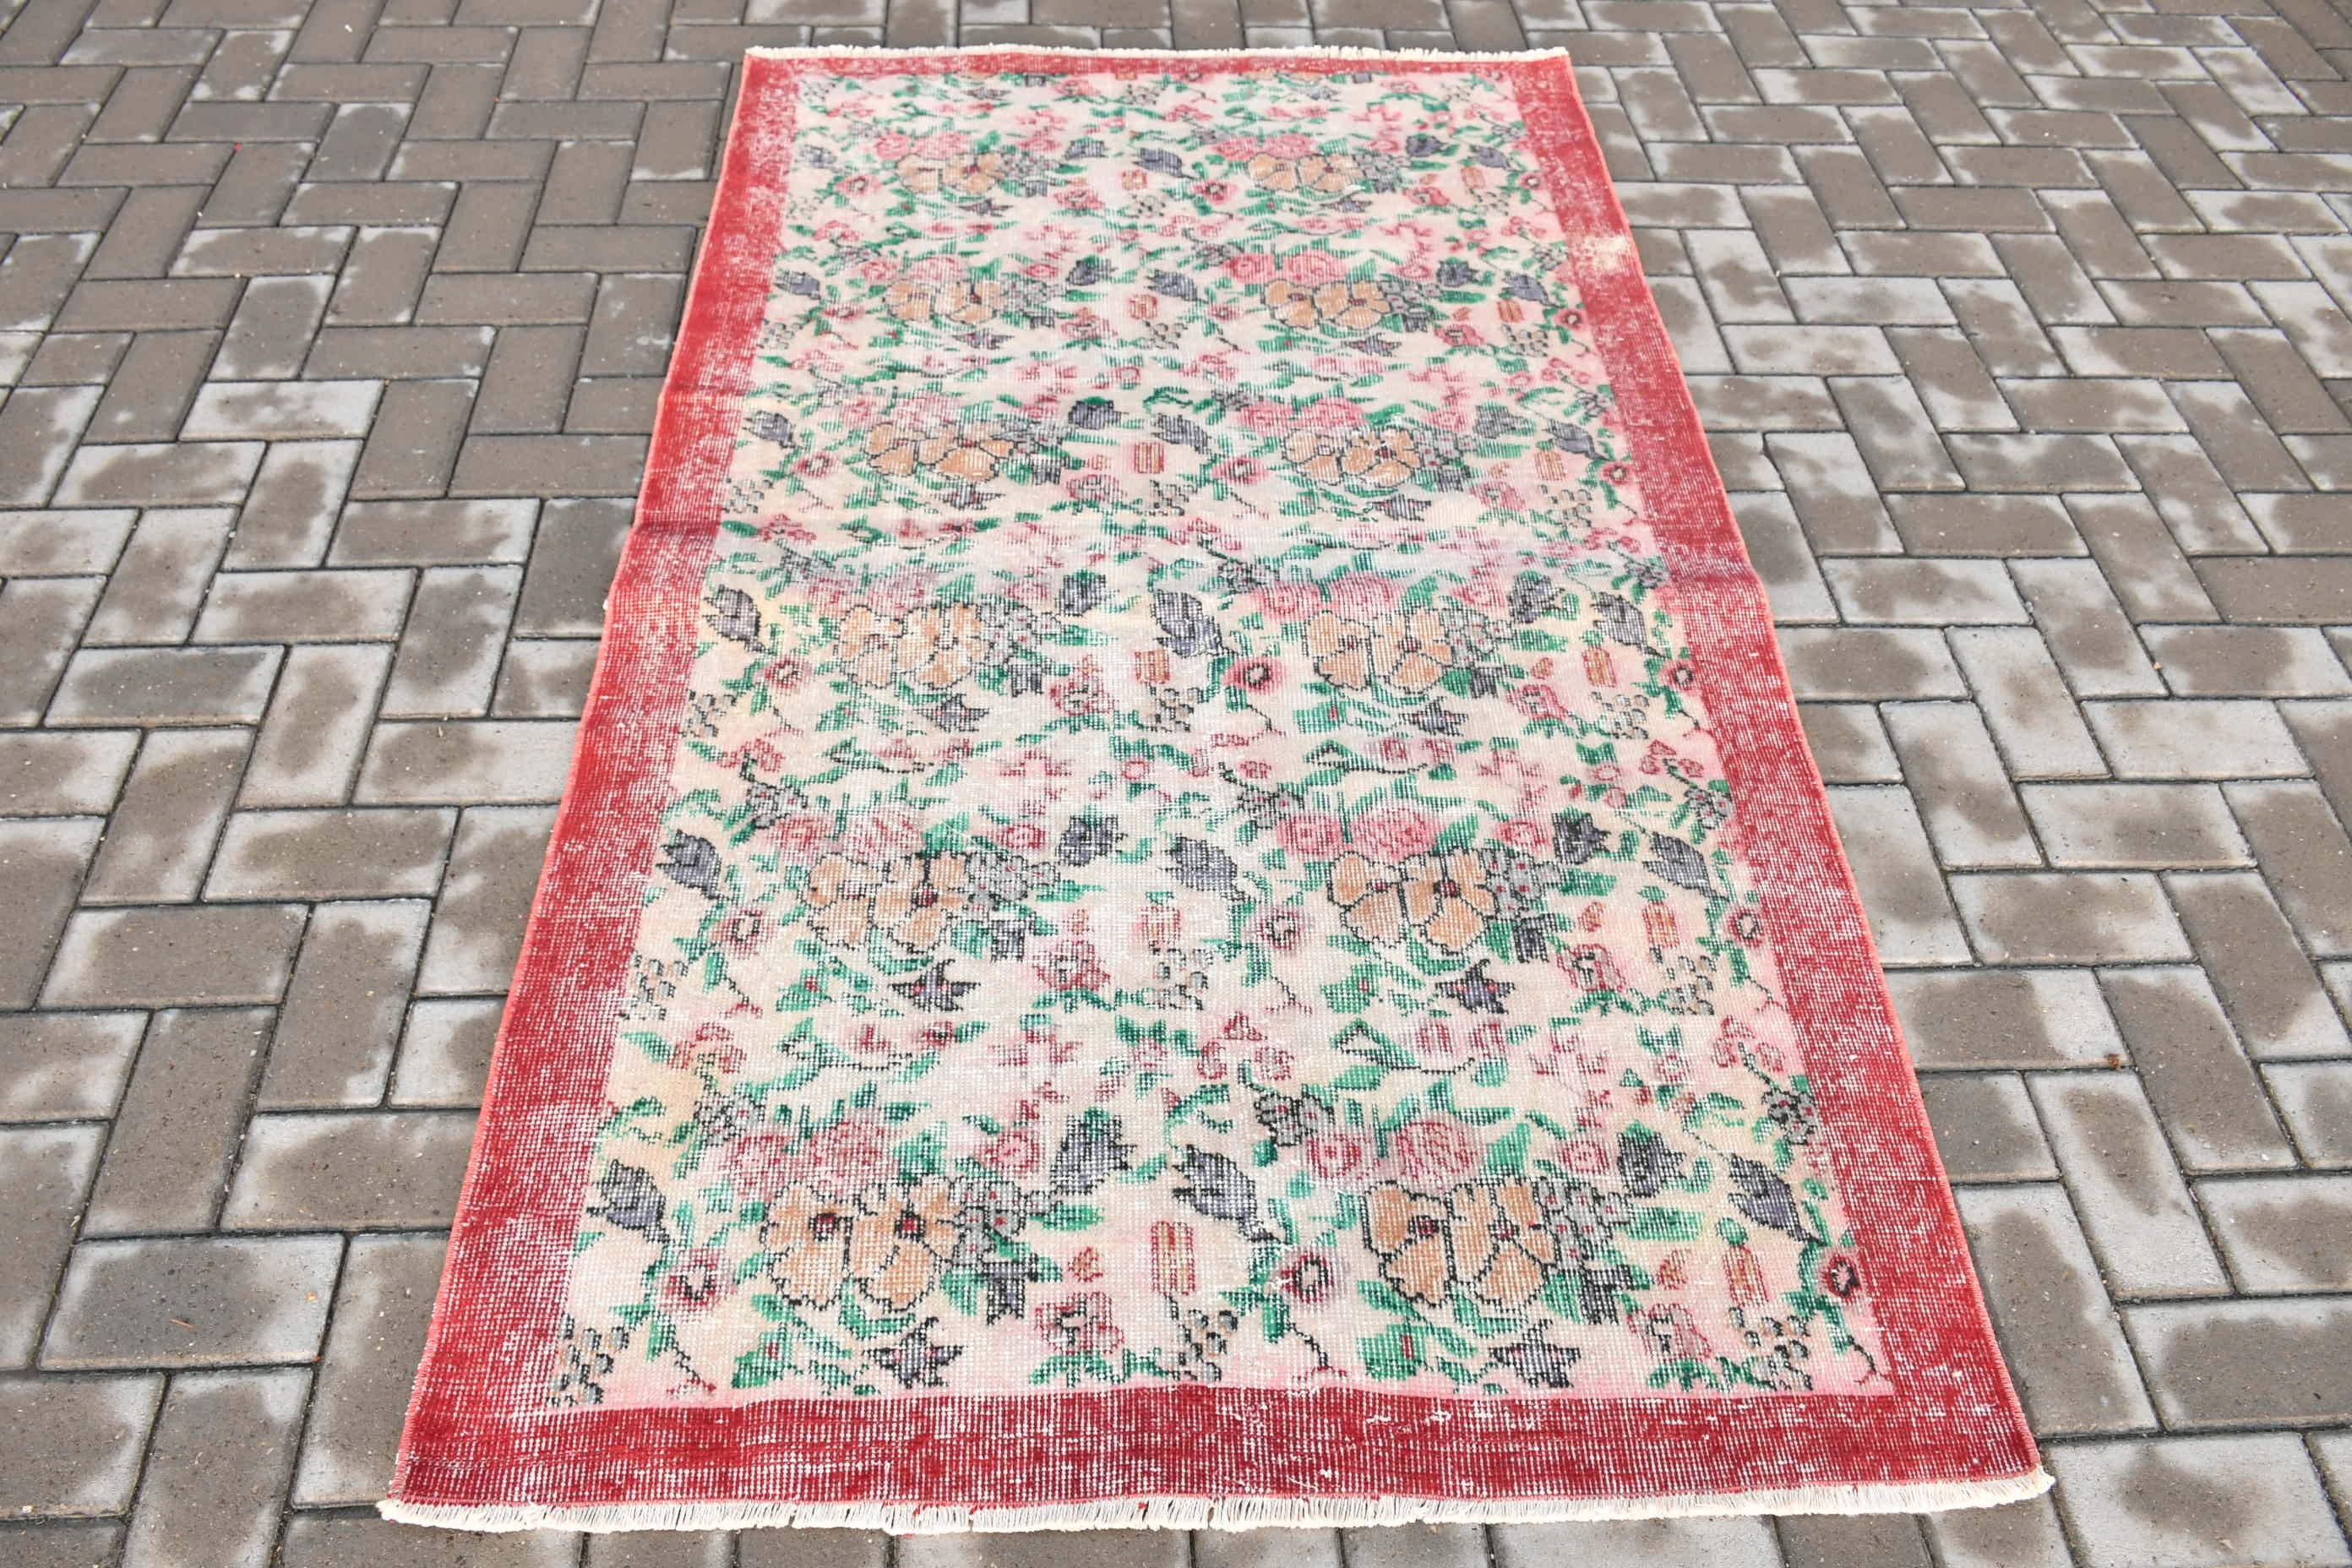 Vintage Rug, Kitchen Rug, Oriental Rug, Turkish Rug, Entry Rug, Red Moroccan Rugs, Rugs for Kitchen, 3.7x6.4 ft Accent Rug